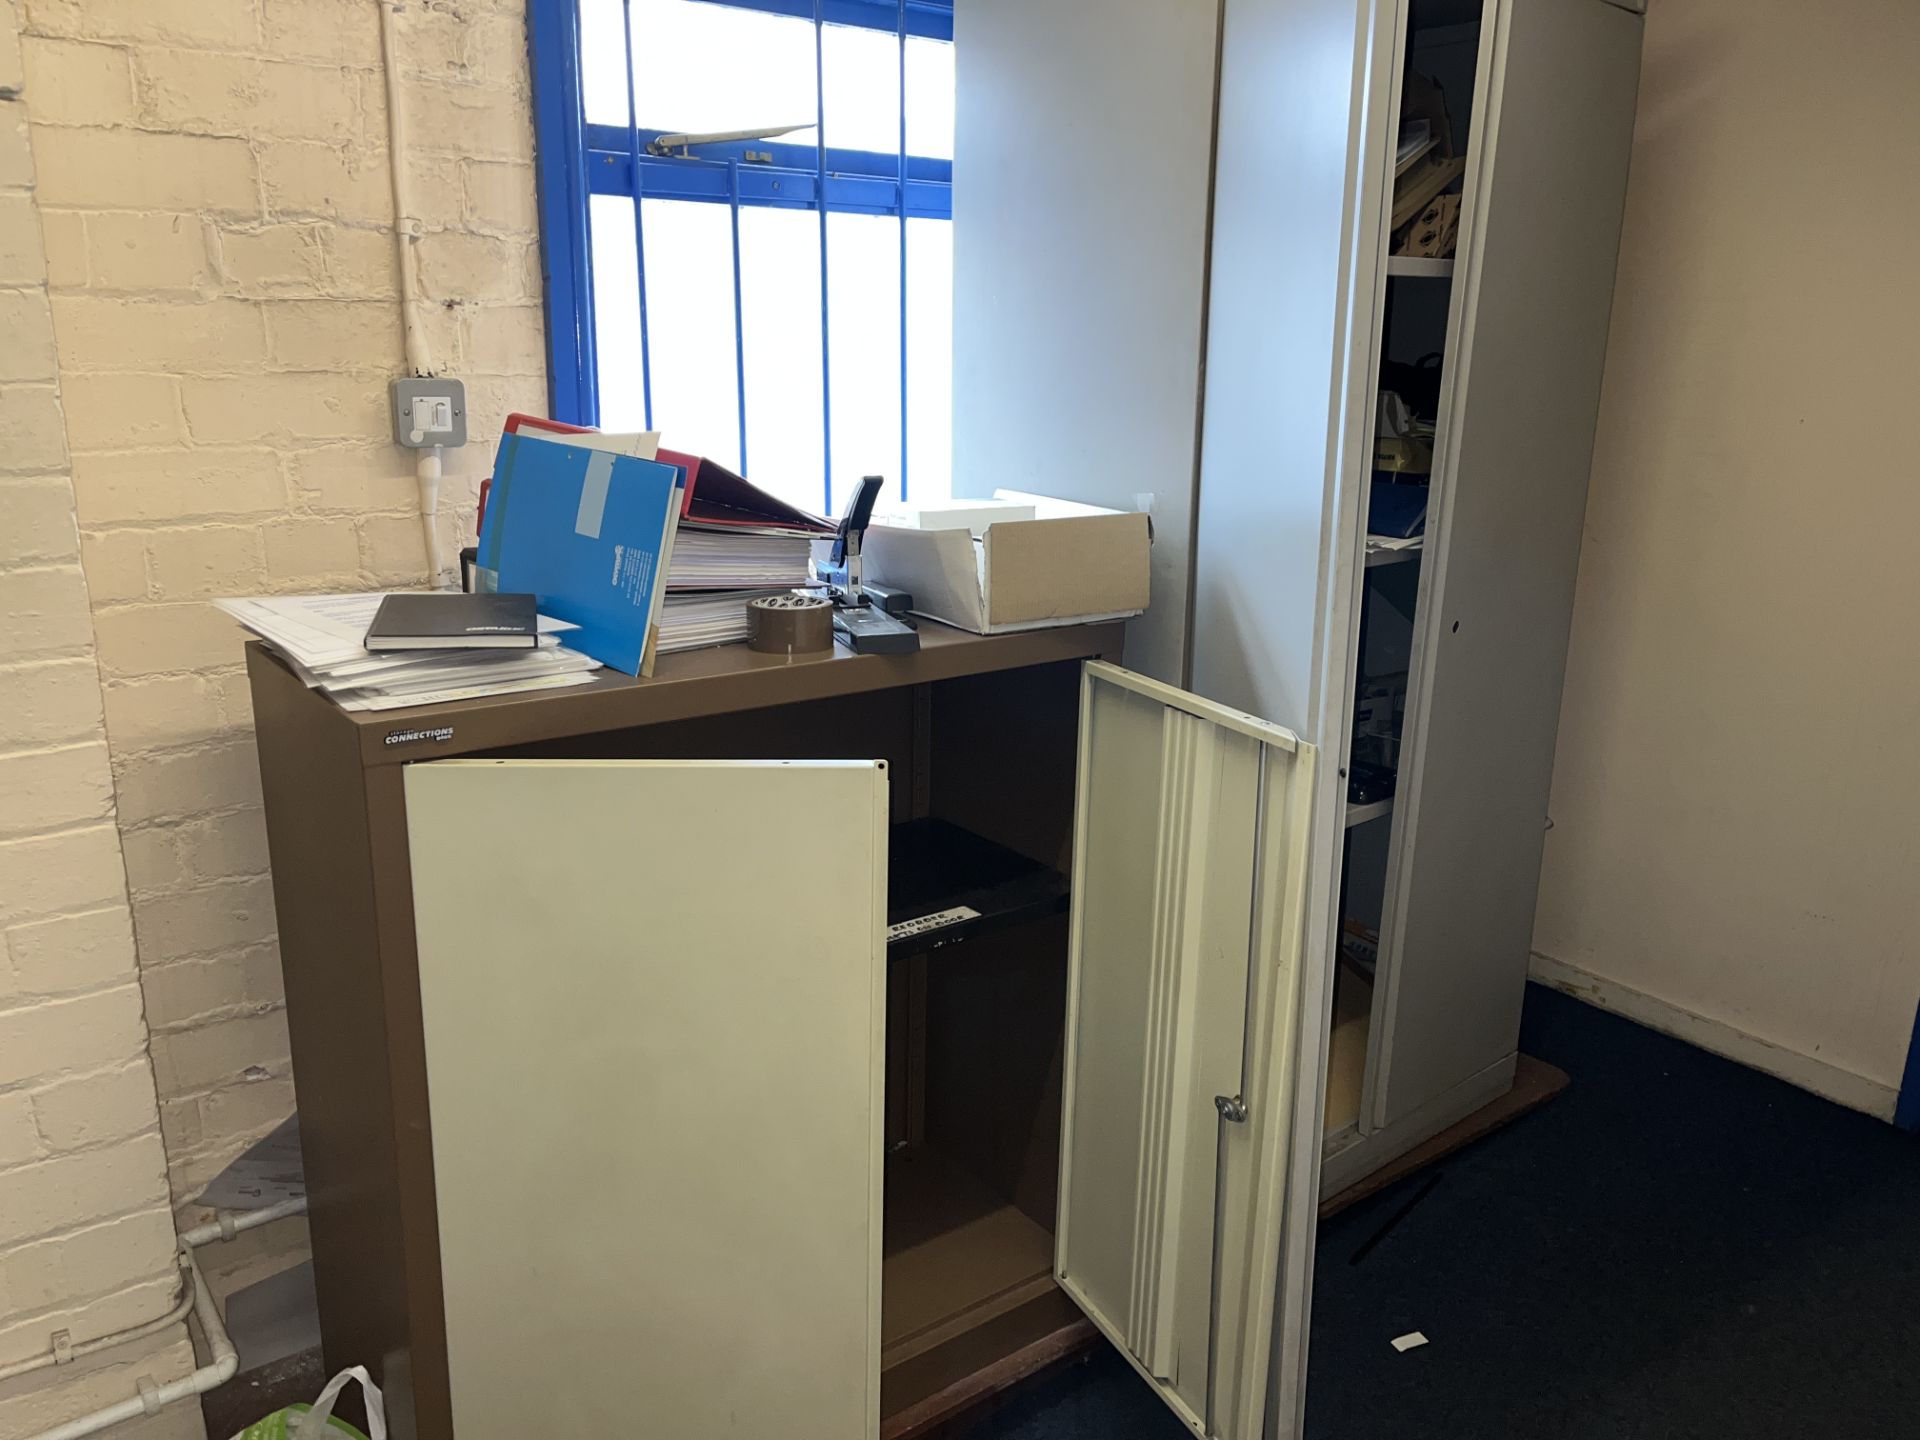 CONTENTS TO OFFICE 3 - INCLUDING 5 OFFICE DESKS, FILING CABINETS, PCS, FILING CABINETS, STAINLESS